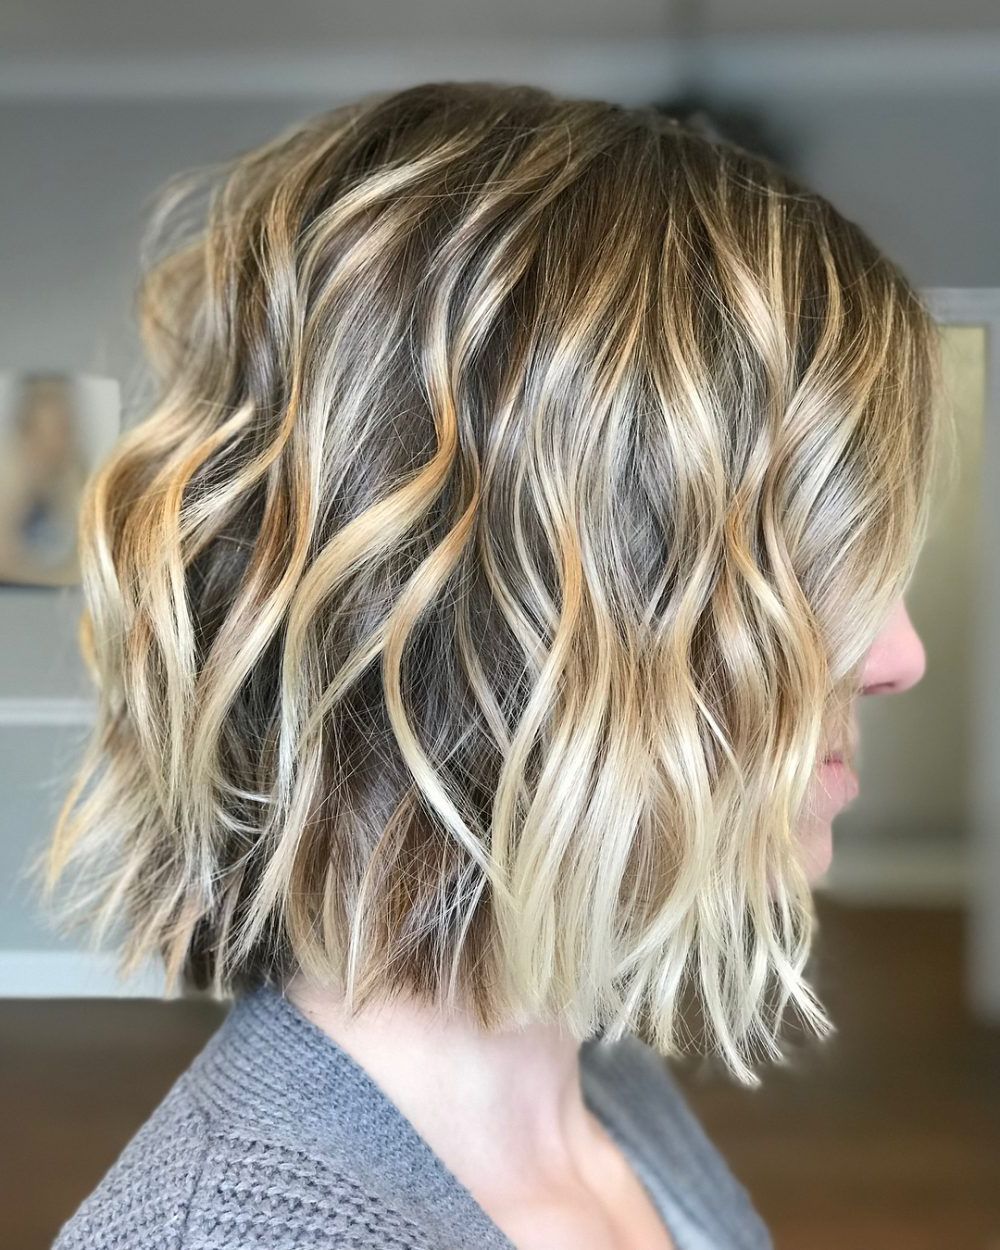 Top 22 Choppy Hairstyles You'll See In 2019 Regarding Fashionable Choppy Waves Hairstyles (View 9 of 20)